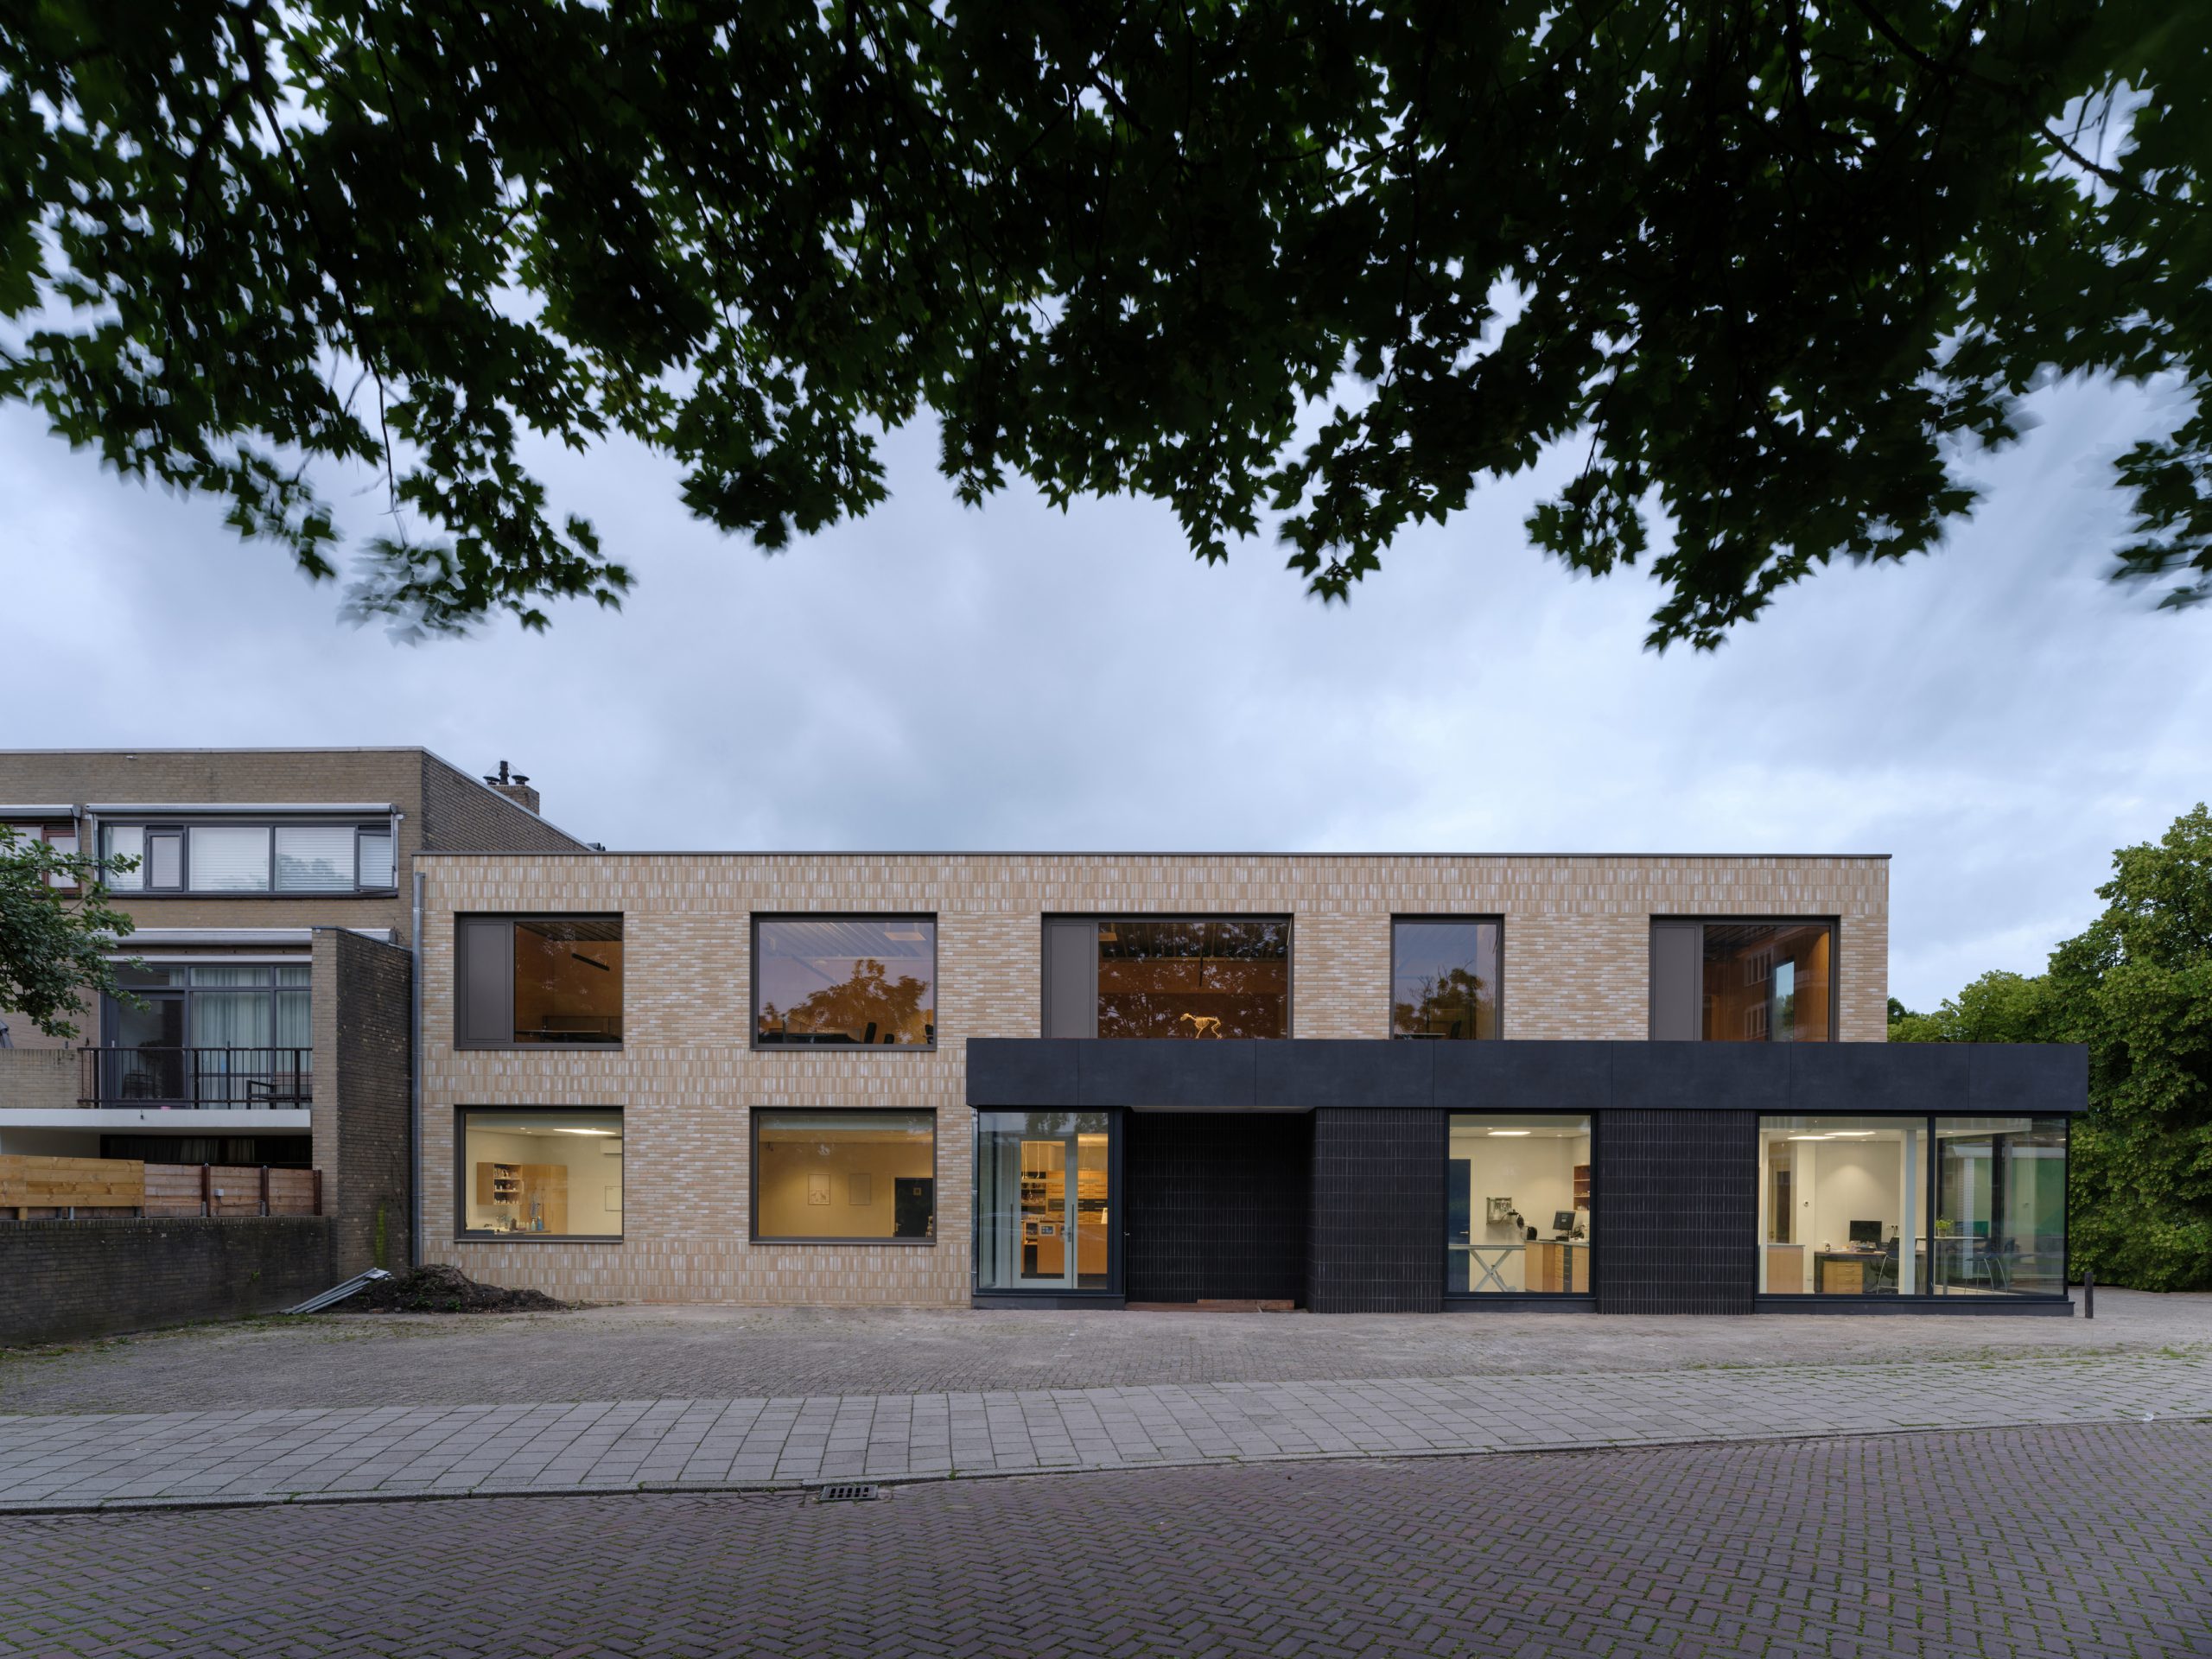 Corner building with glass corner aluminum window frames on ground floor extension. Light colored brick on CLT wood wall and new main entrance to veterinary clinic. Veterinary clinic design for Anicure ‘t Leidse Land in Leiderdorp, designed and built by MOST Architecture, Rotterdam